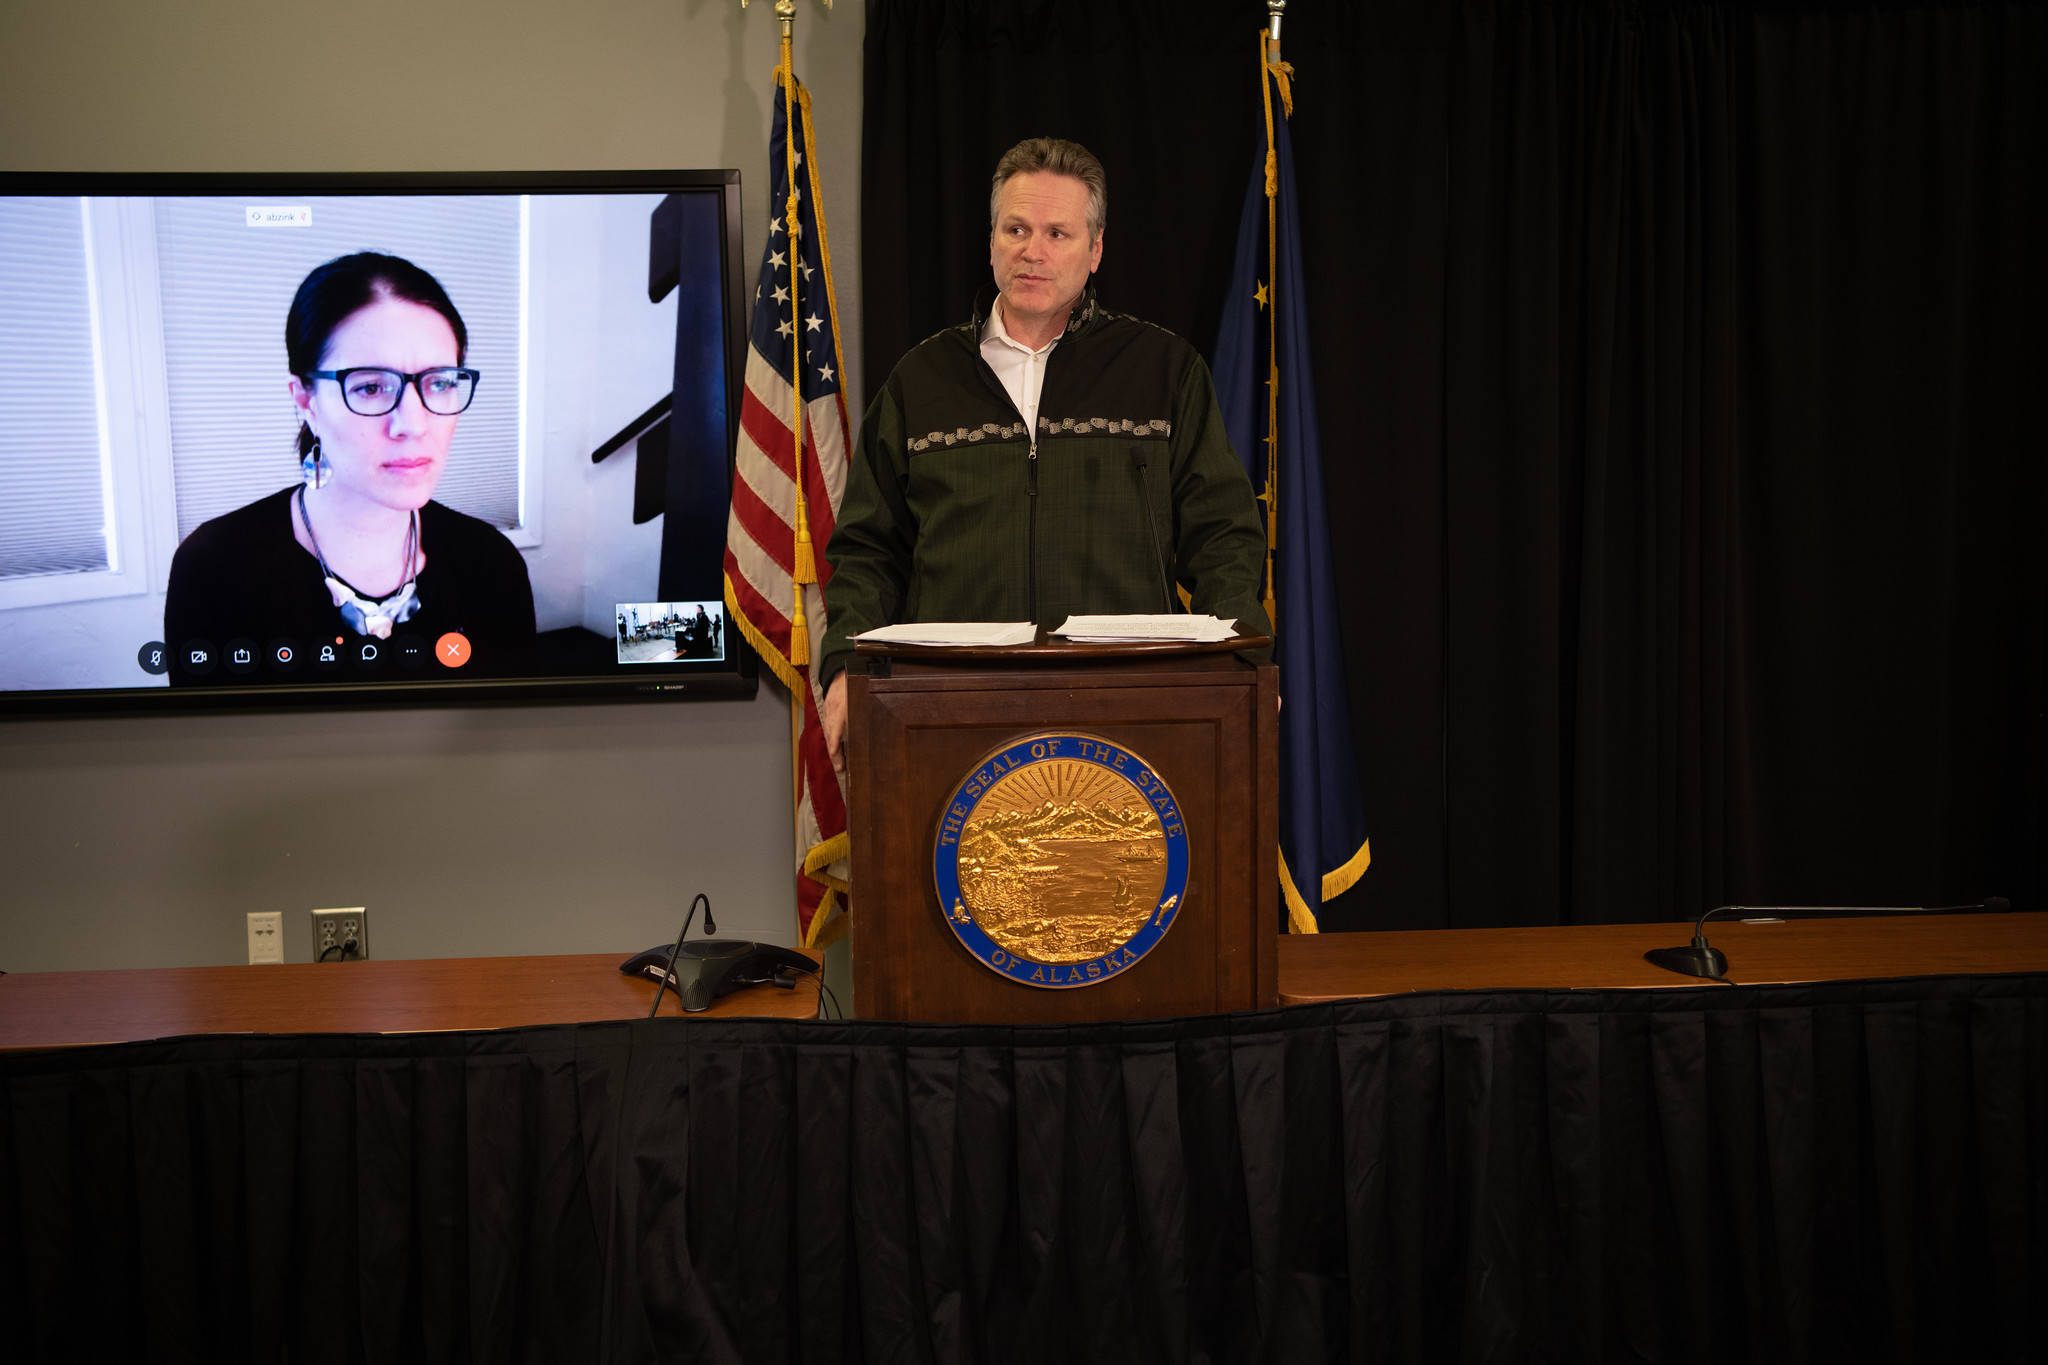 Gov. Mike Dunleavy presents with Chief Medical Officer Dr. Anne Zink via teleconference in Anchorage during March 31, 2020 coronavirus press update. (Courtesy photo)